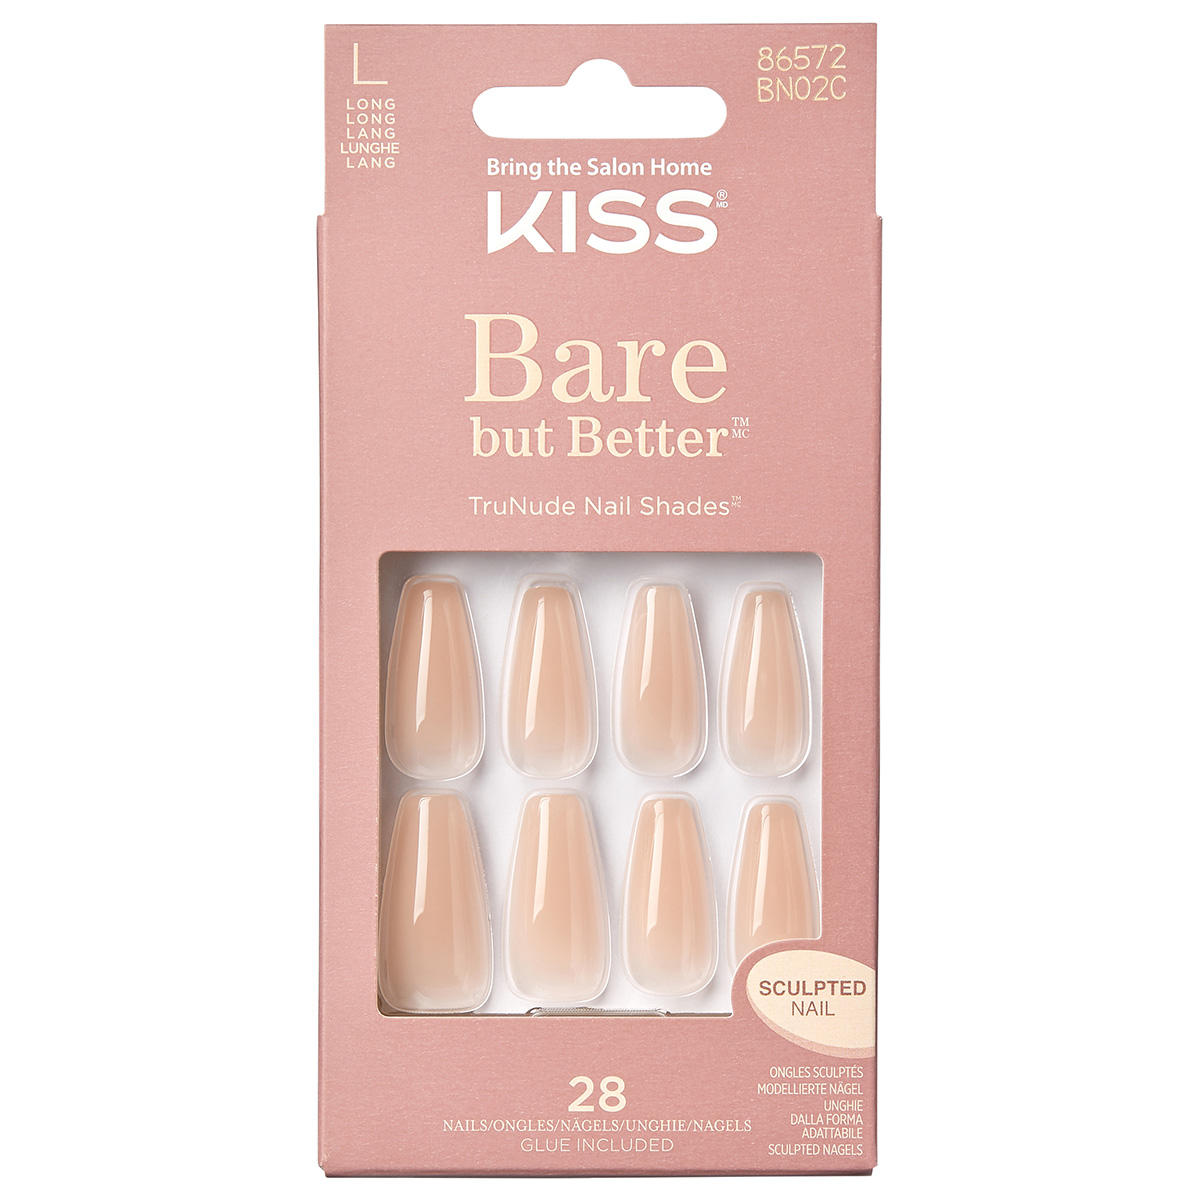 KISS Bare but Better Nails - Nude Drama  - 1